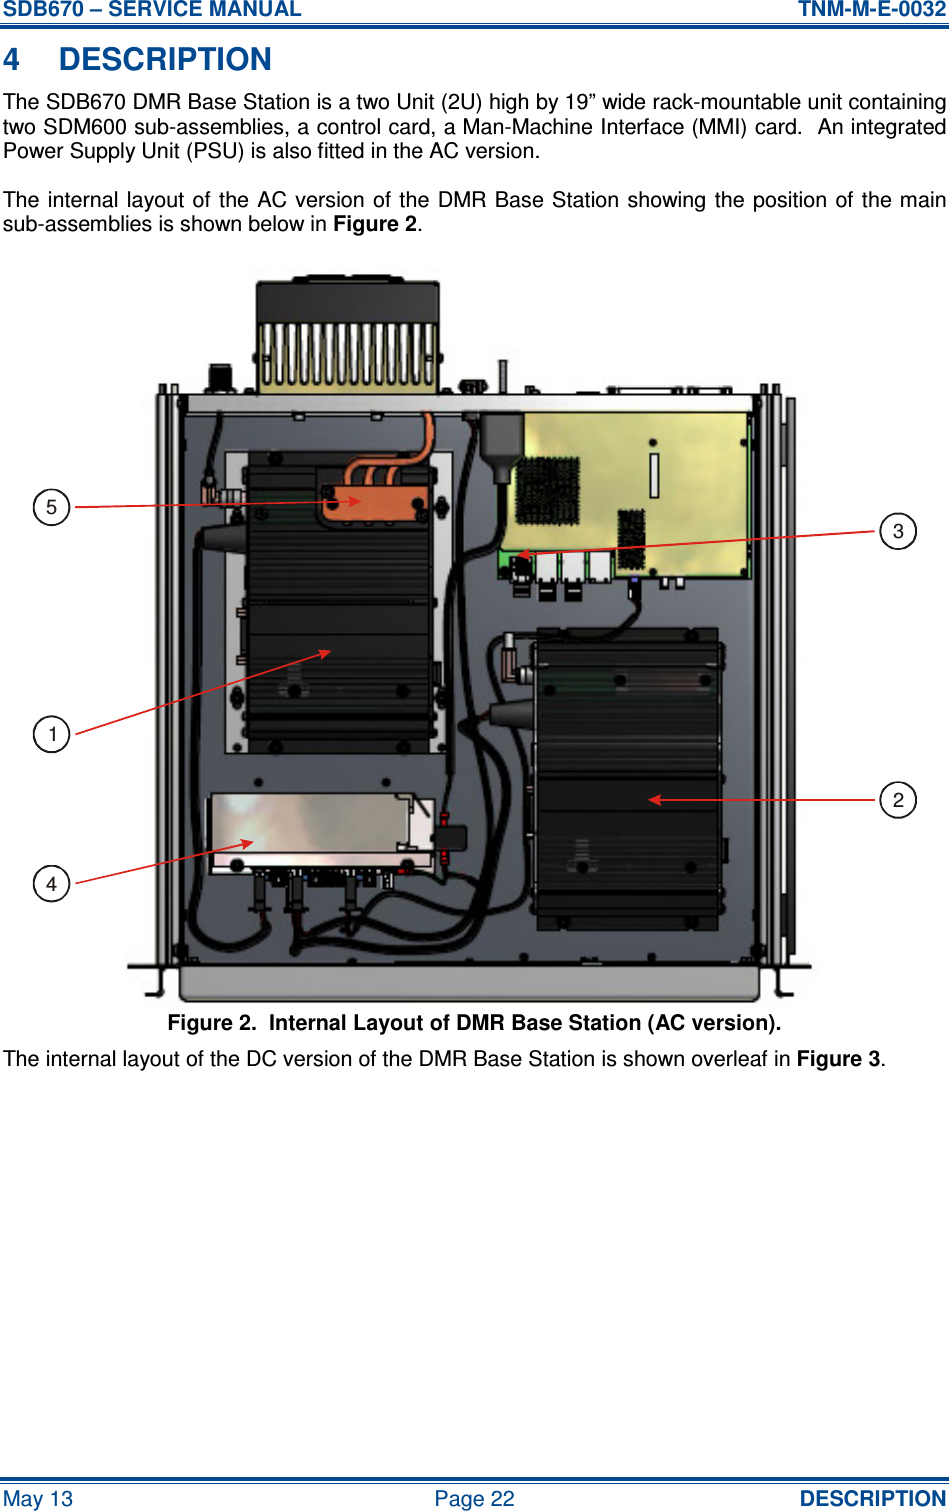 SDB670 – SERVICE MANUAL  TNM-M-E-0032 May 13  Page 22  DESCRIPTION 4  DESCRIPTION The SDB670 DMR Base Station is a two Unit (2U) high by 19” wide rack-mountable unit containing two SDM600 sub-assemblies, a control card, a Man-Machine Interface (MMI) card.  An integrated Power Supply Unit (PSU) is also fitted in the AC version. The internal layout of the AC version of the DMR Base Station showing  the position of the main sub-assemblies is shown below in Figure 2. Figure 2.  Internal Layout of DMR Base Station (AC version). The internal layout of the DC version of the DMR Base Station is shown overleaf in Figure 3.  52314